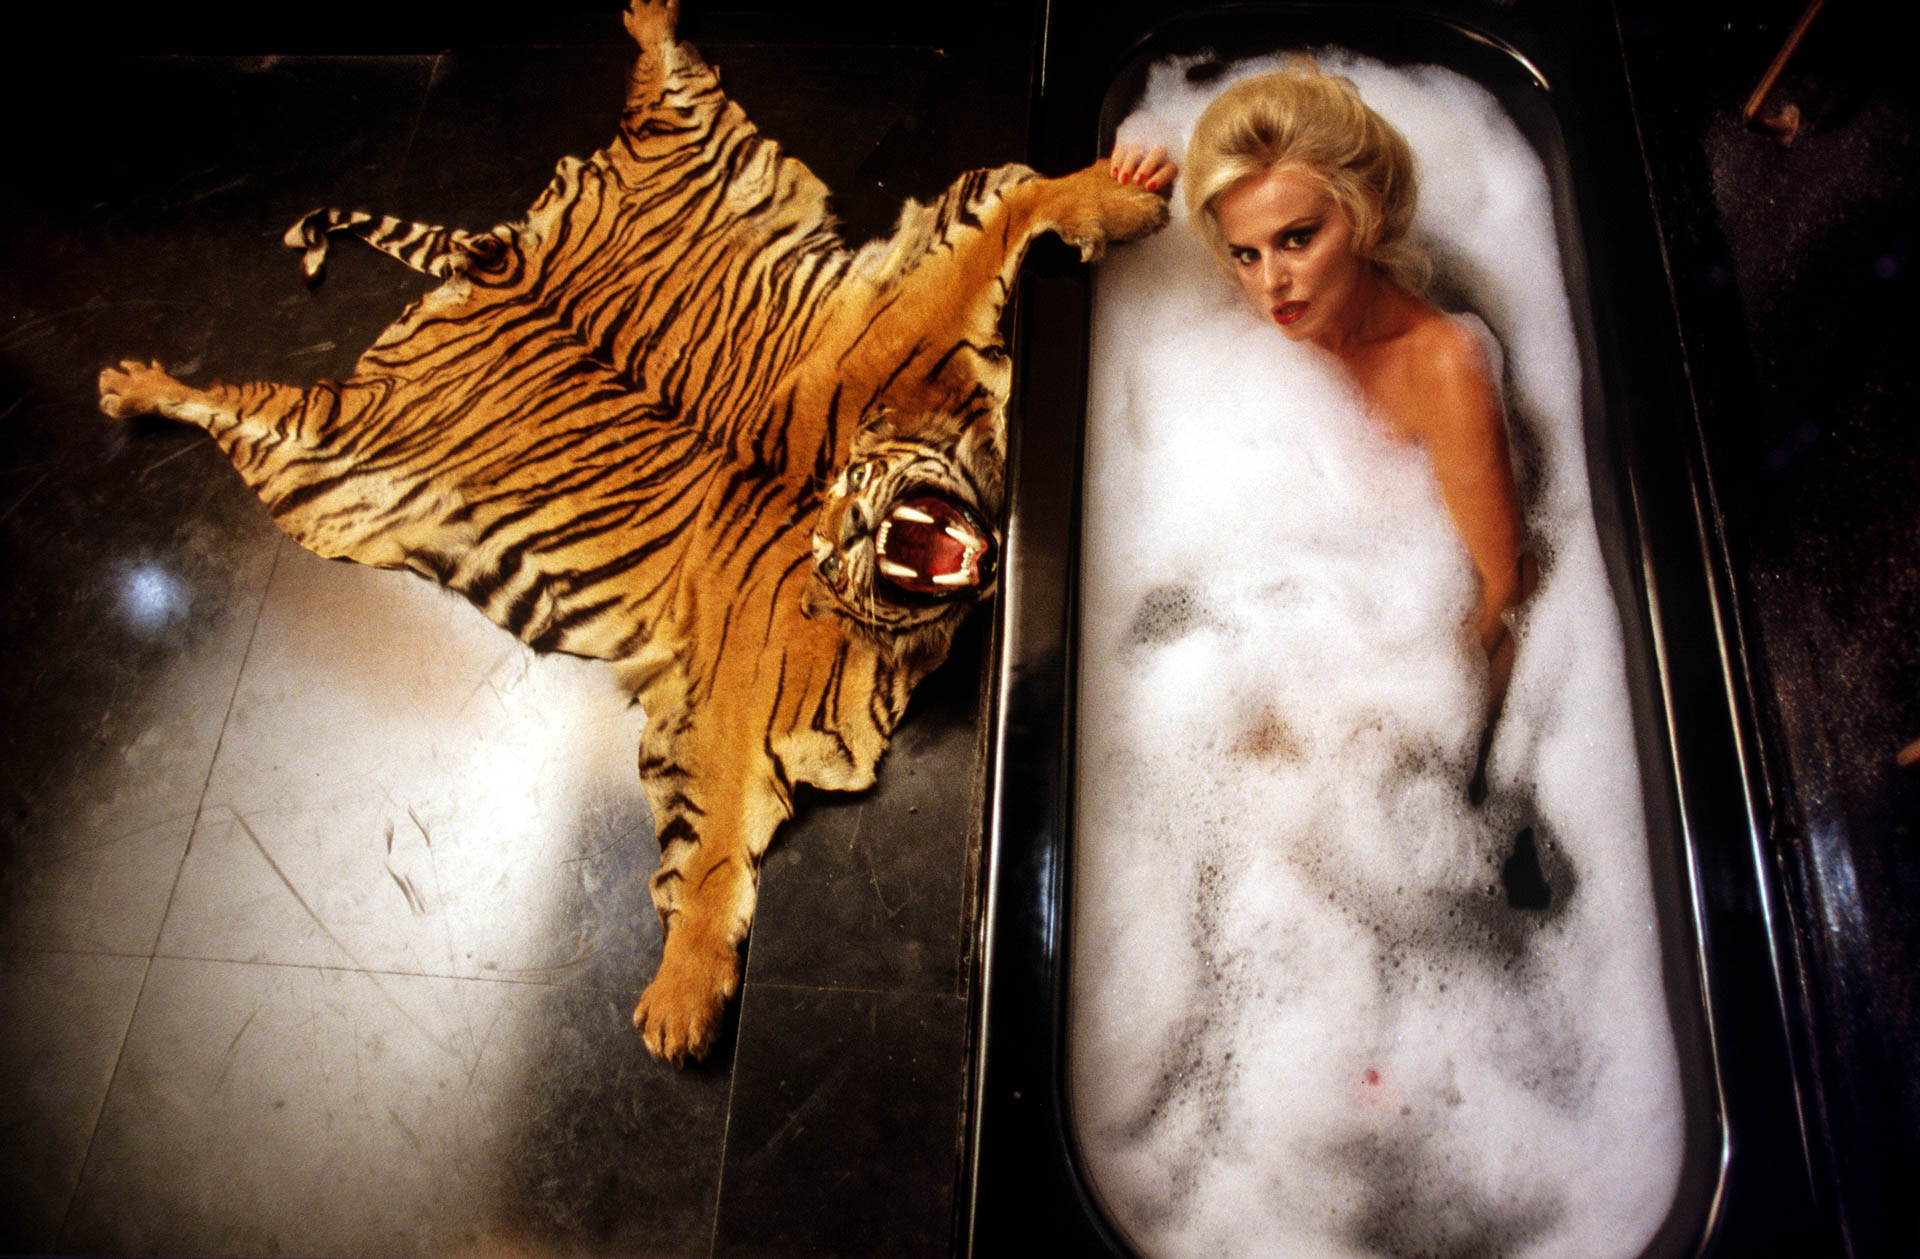  Rome, Italy - October 1987 
Countess Donatella Pecci Blunt taking a bath in the bathroom of her private apartments, on the top floor of Palazzo Pecci.
© GIANNI GIANSANTI 